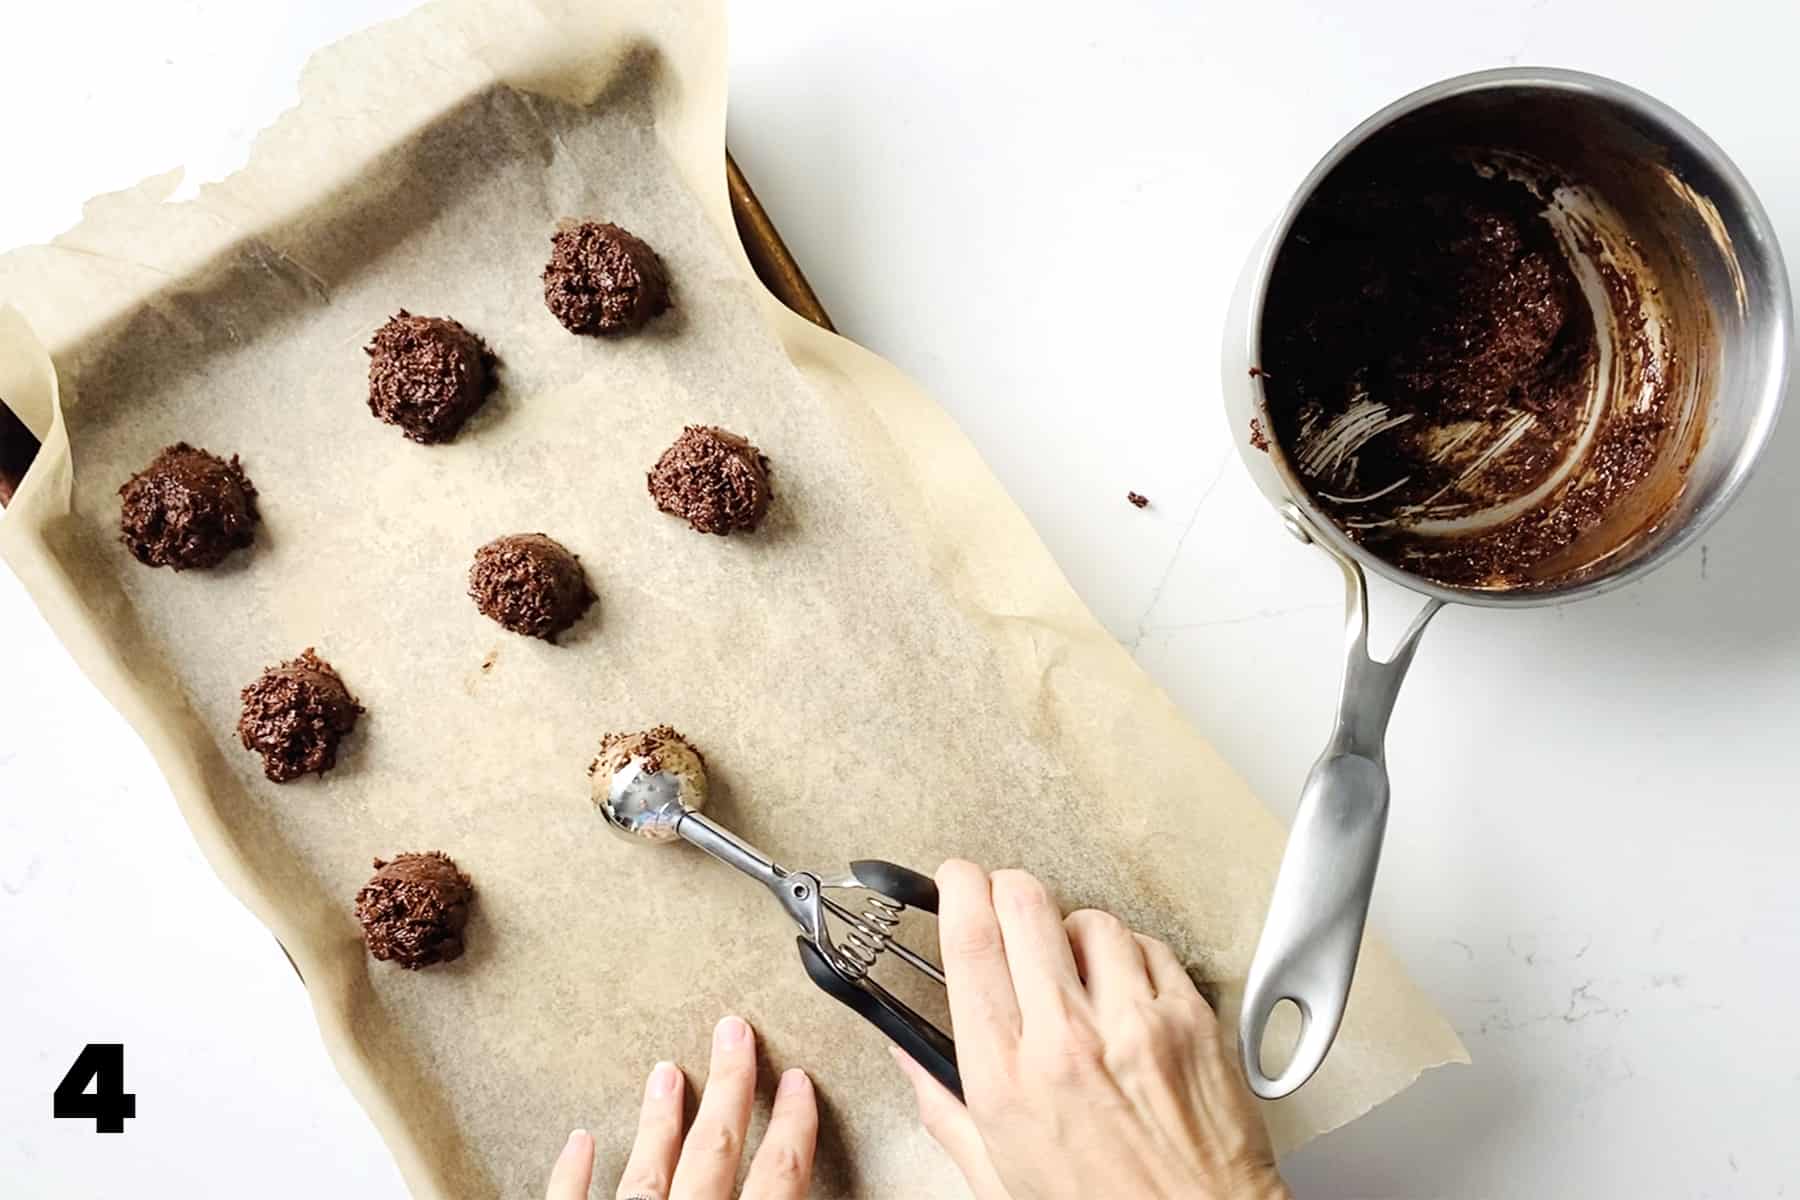 using scooper to scoop chocolate truffles into parchment lined baking sheet.